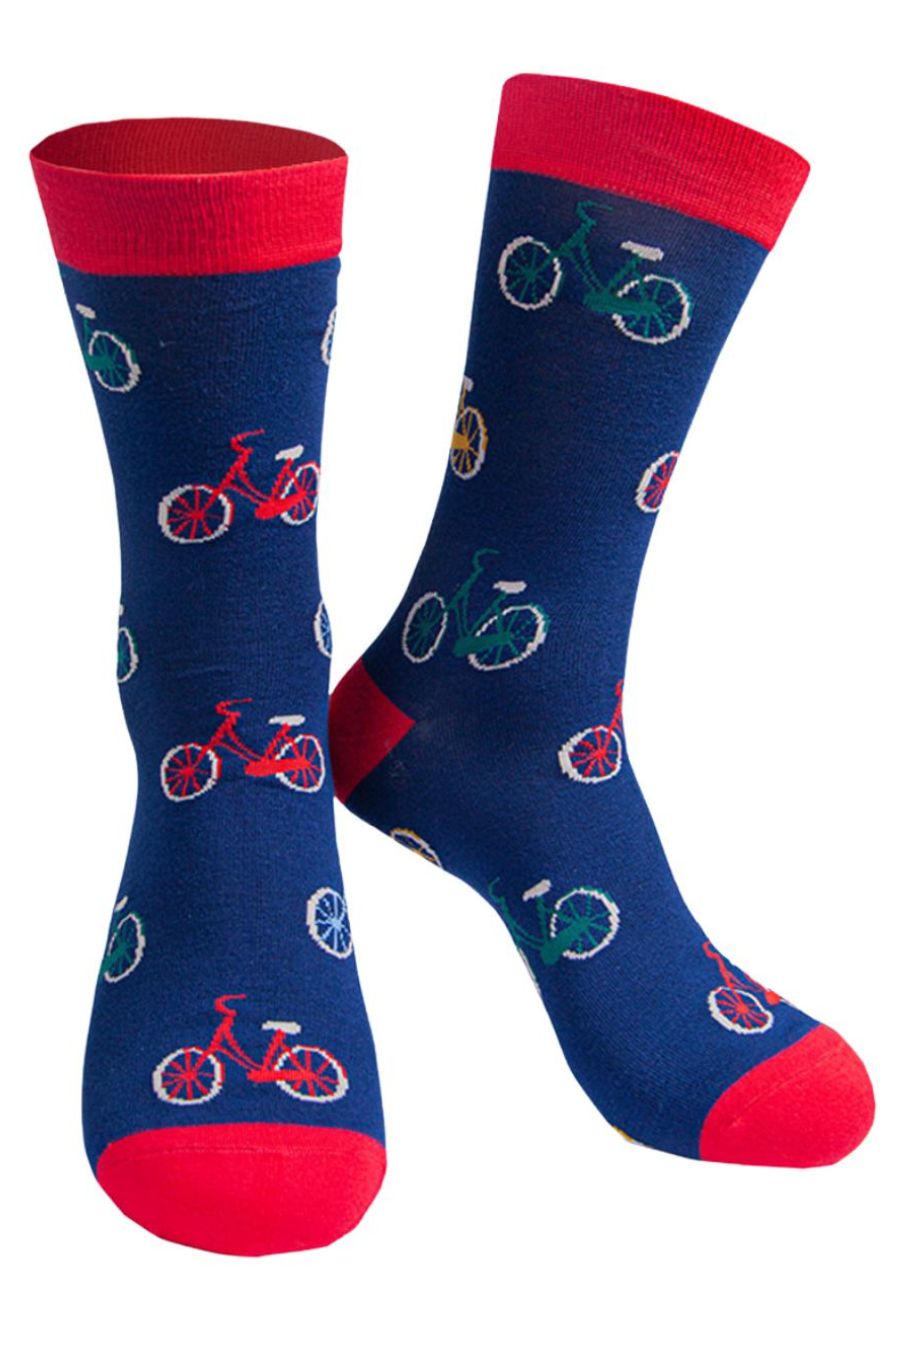 Mens bamboo socks with a multicoloured bicyle print design.